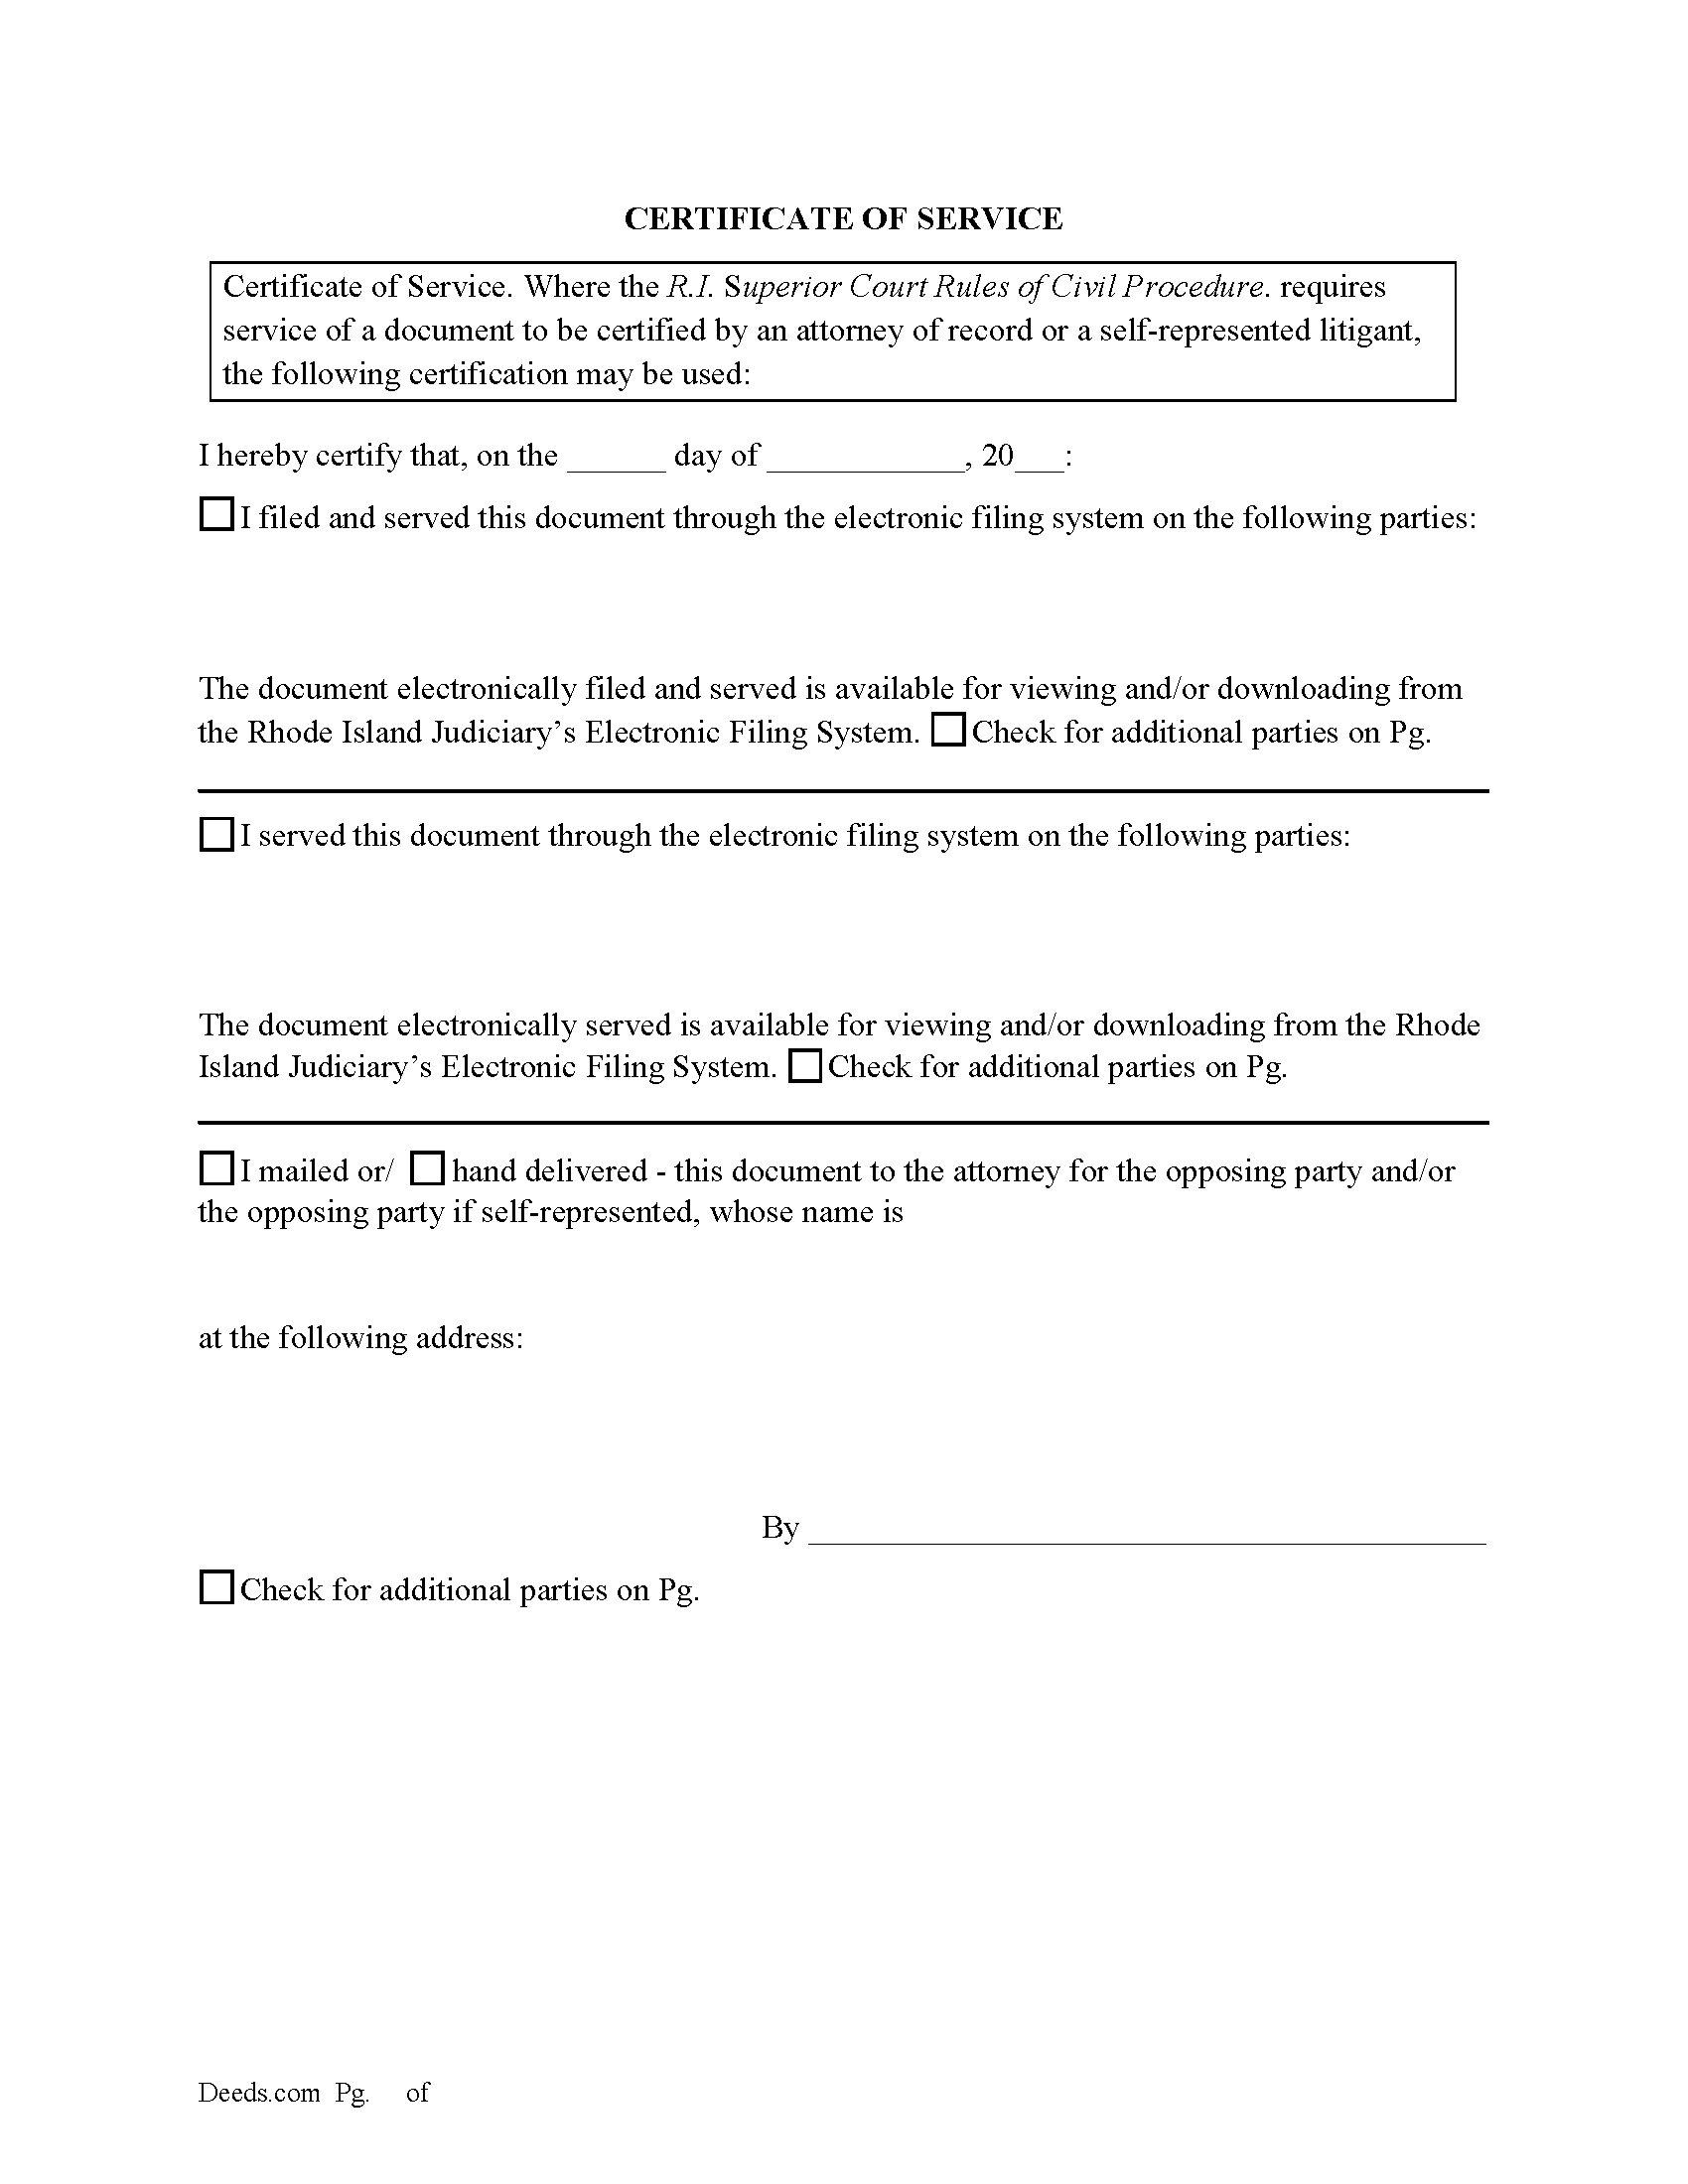 R.I. Certificate of Service Form